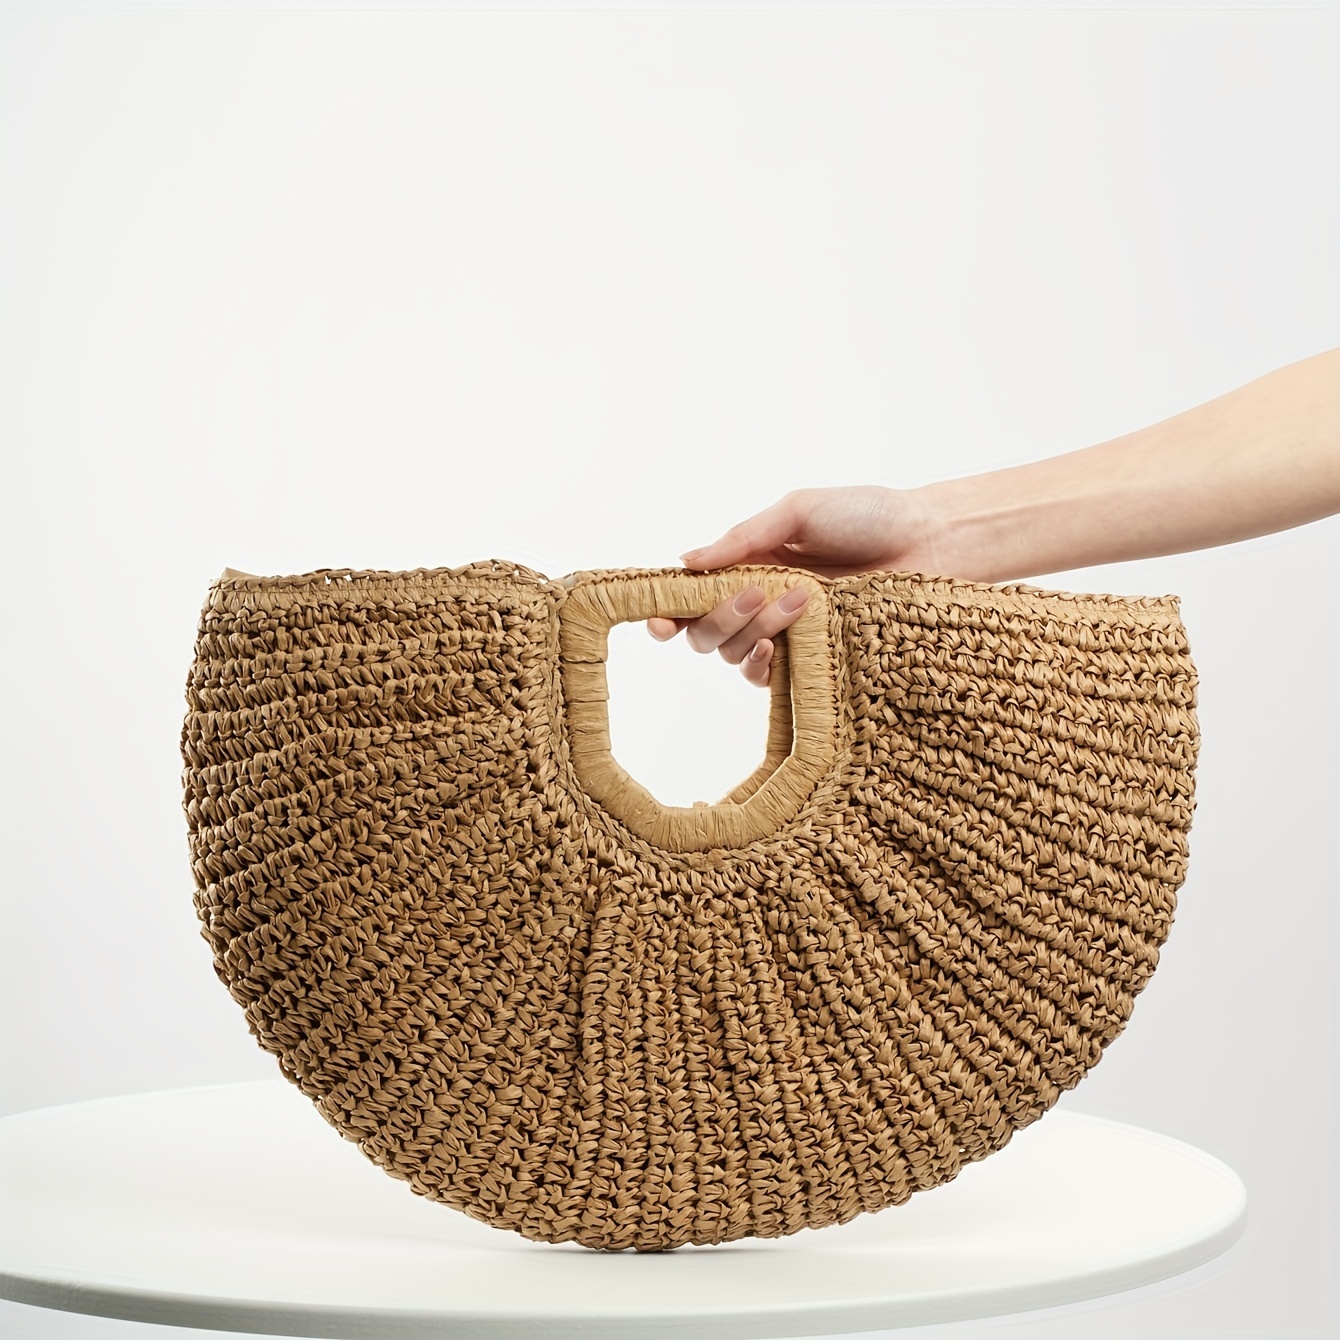 

Straw Woven Beach Bag, Boho Style Clutch Bag, Round Tote Bag For Travel Vacation For Holiday Use